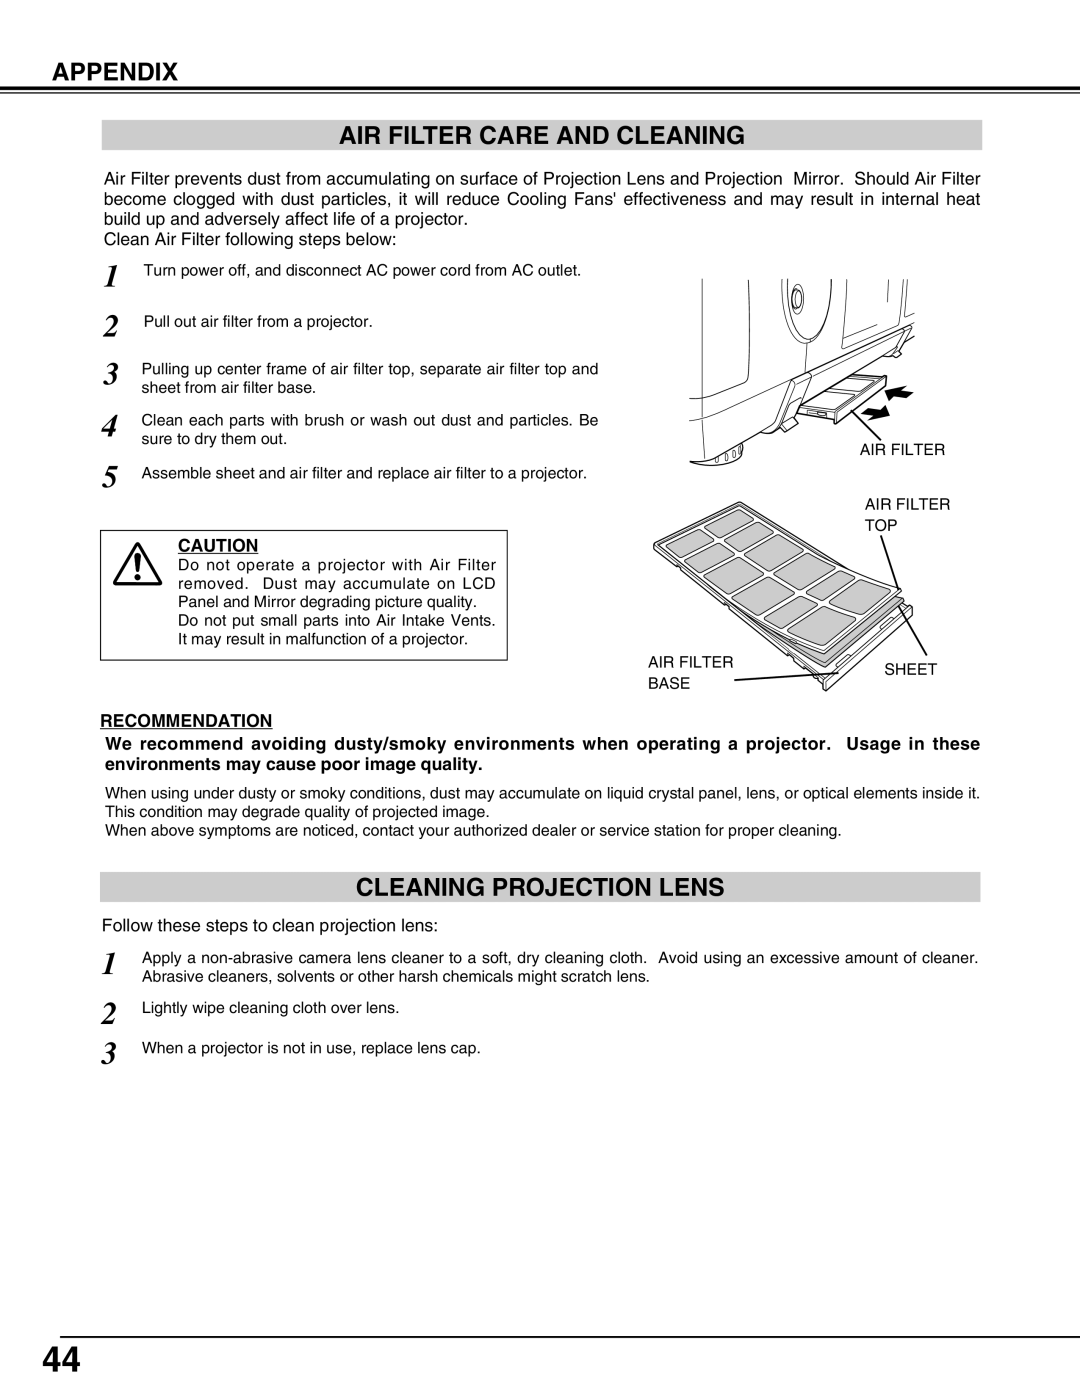 Eiki LC-UXT3 instruction manual Appendix Air Filter Care And Cleaning, Cleaning Projection Lens, Recommendation 